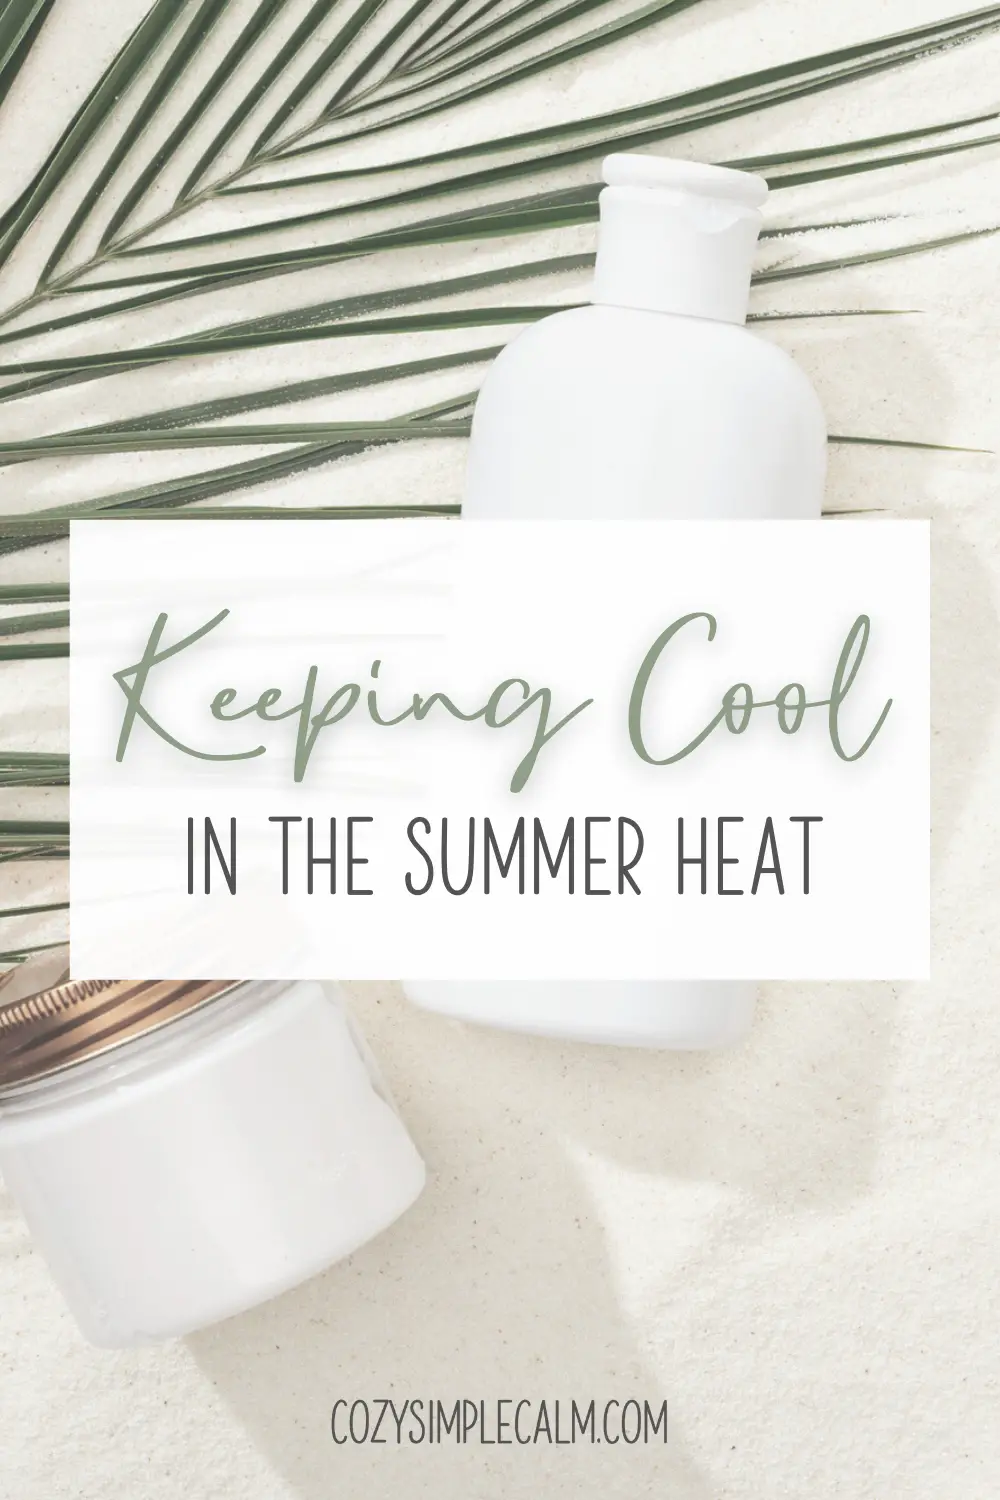 Image of lotion bottles on sand with palm leaf - Text overlay: keeping cool in the summer heat - cozysimplecalm.com